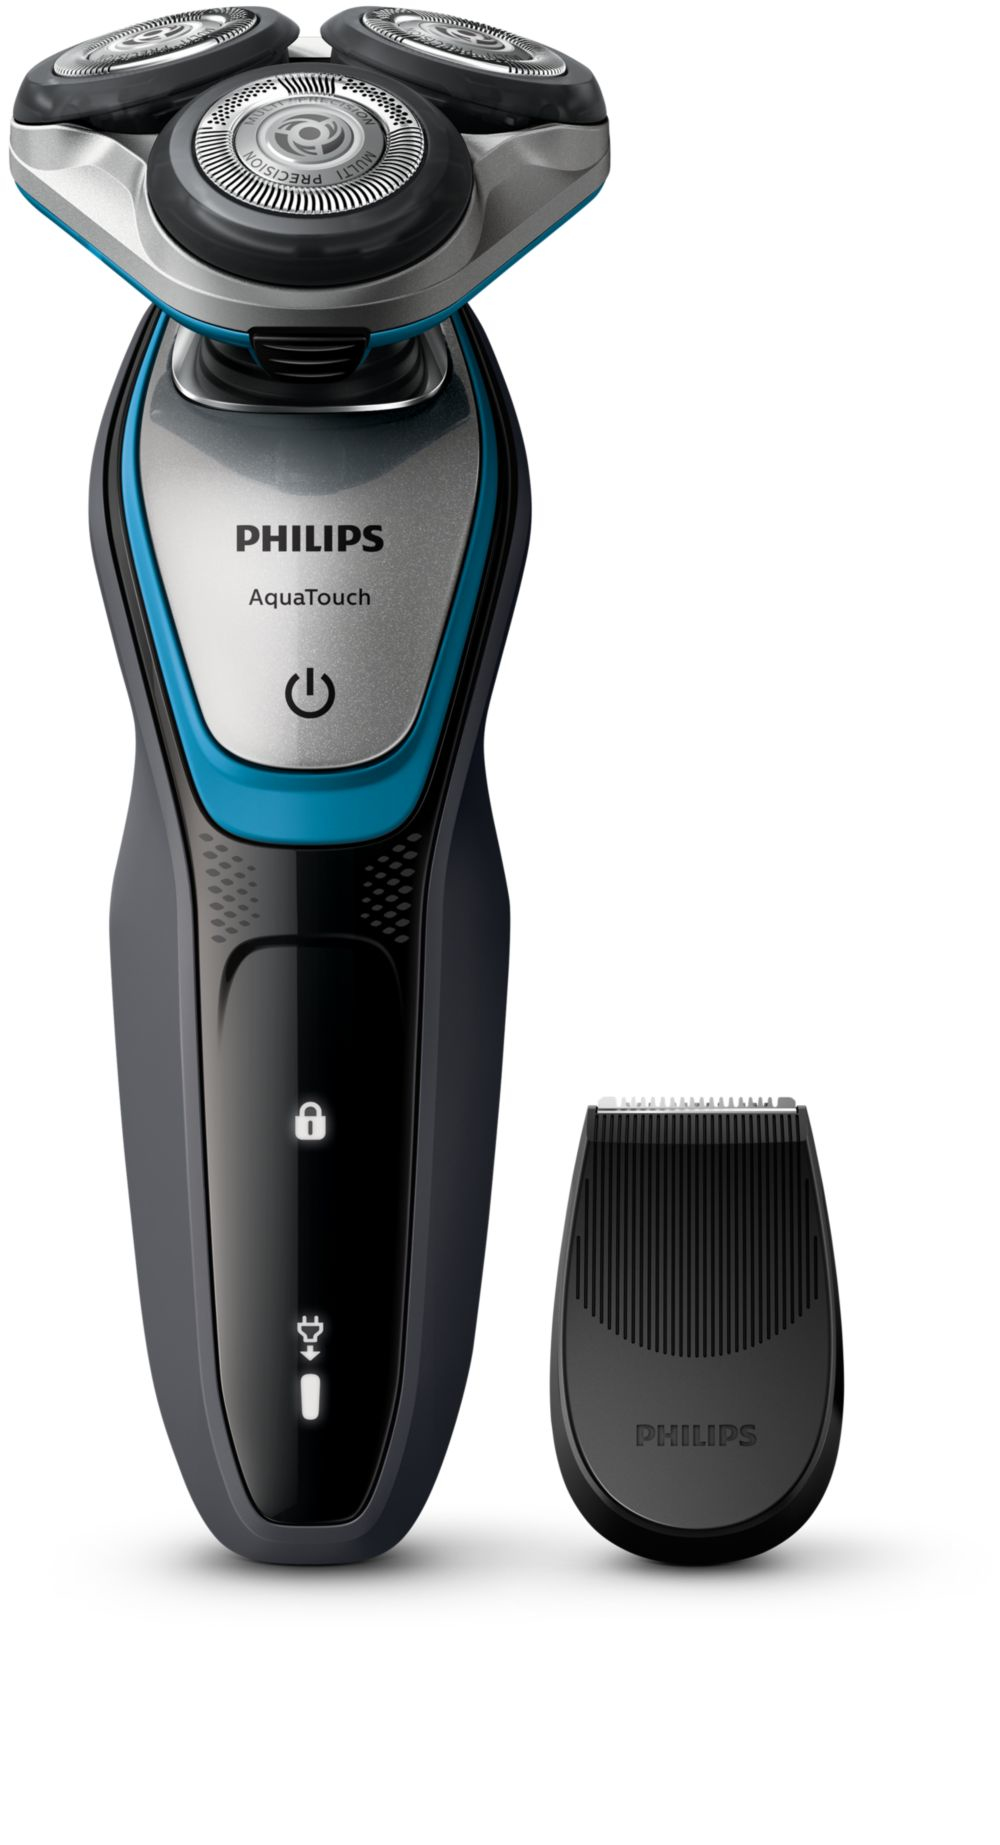 Image of Philips AquaTouch S5400